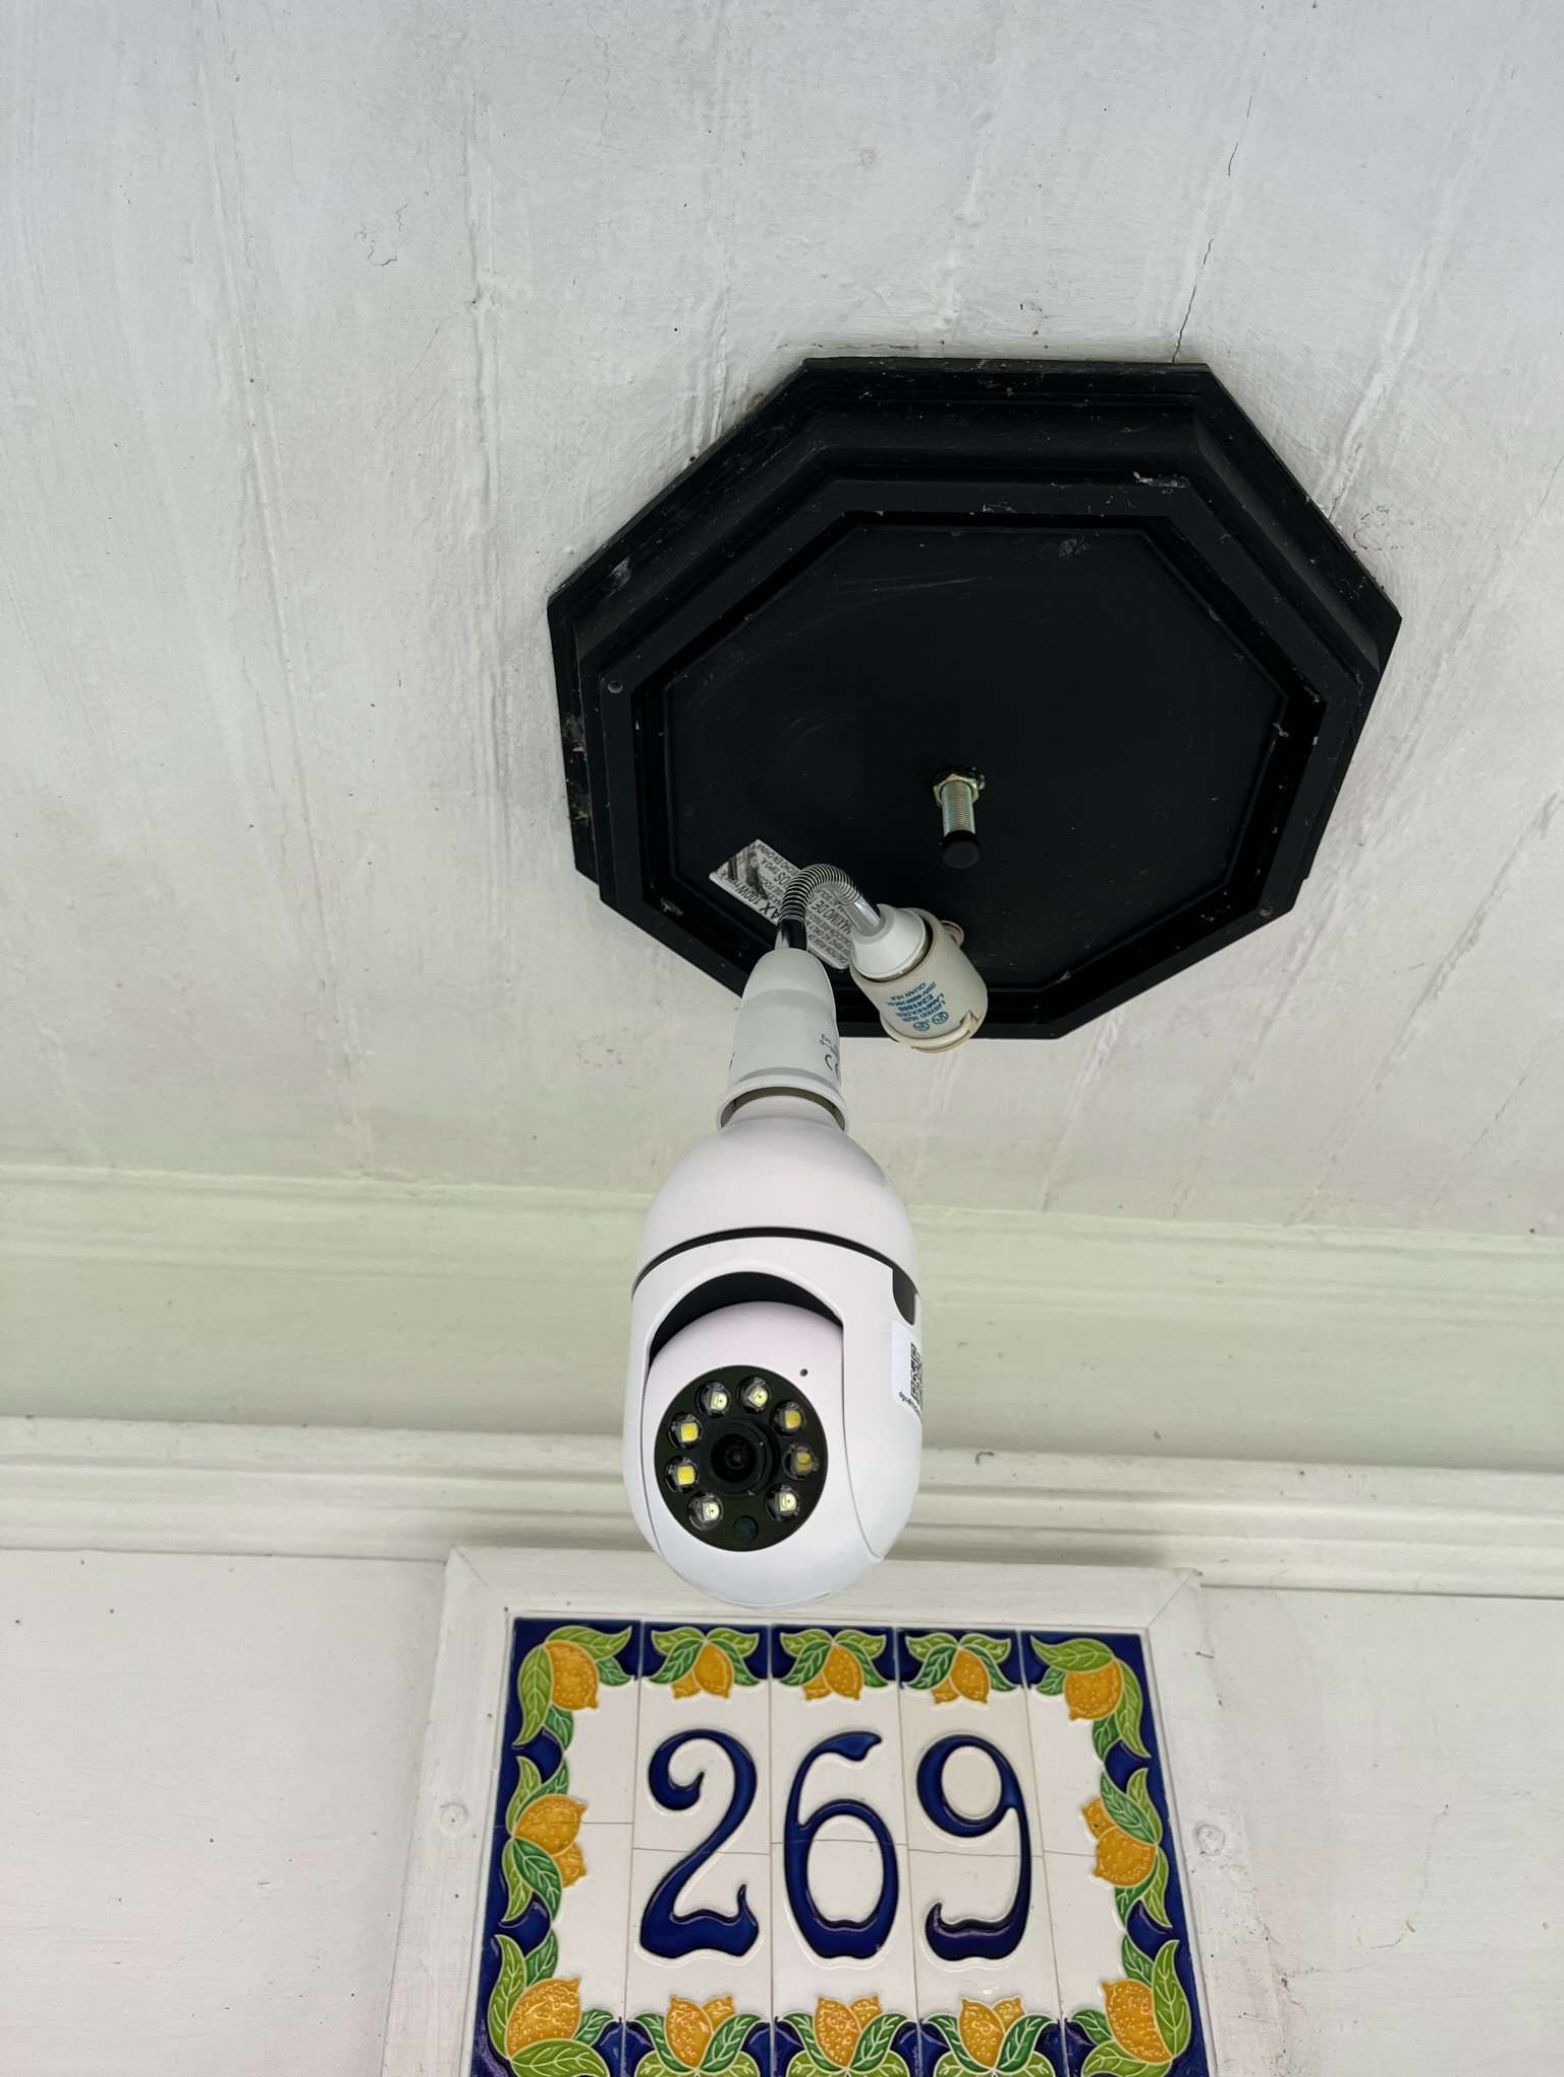 Is Nomad Security Camera A Scam